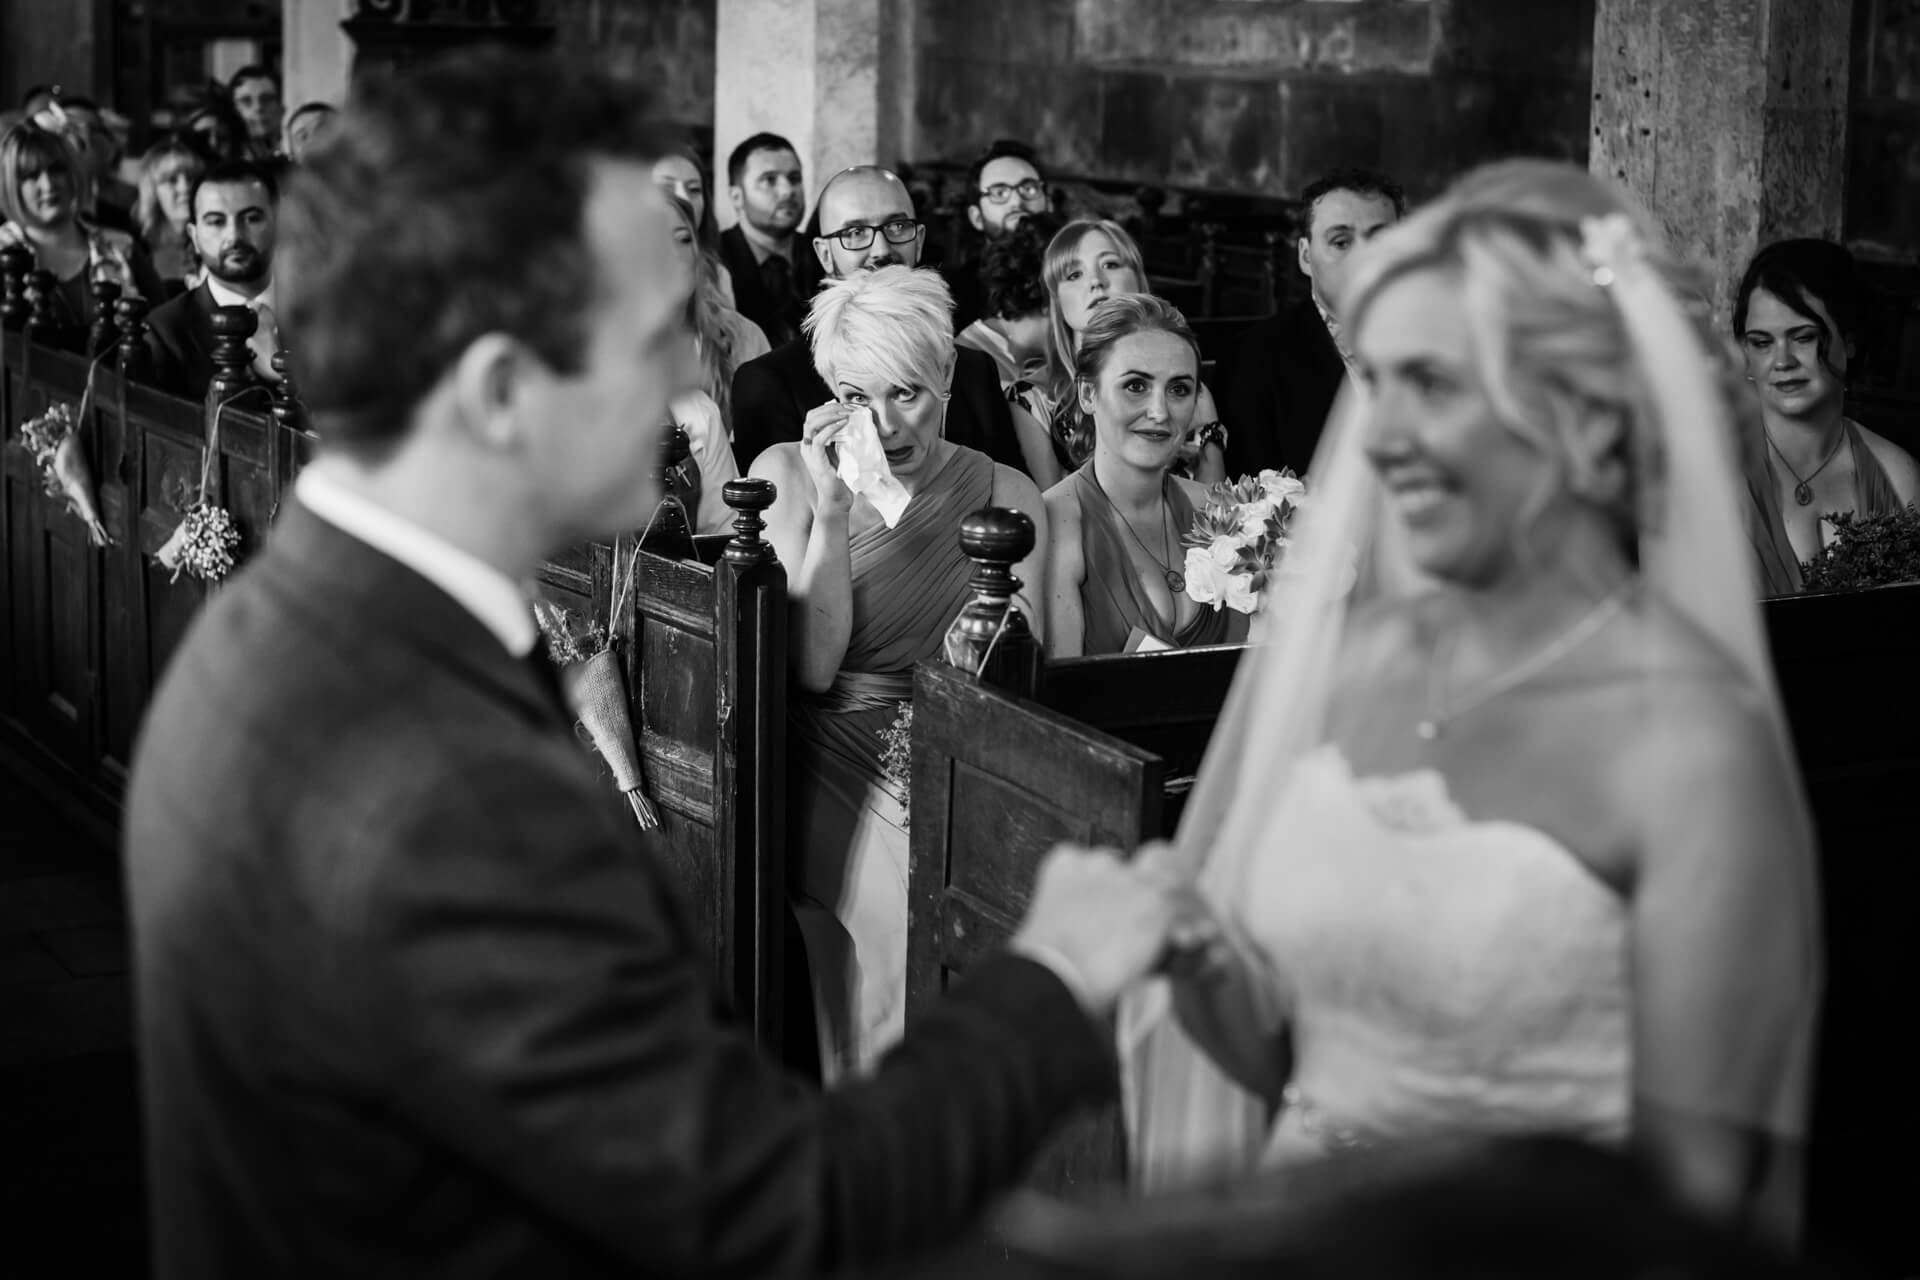 bridesmaid cries in the audience as the wedding couple take their vows